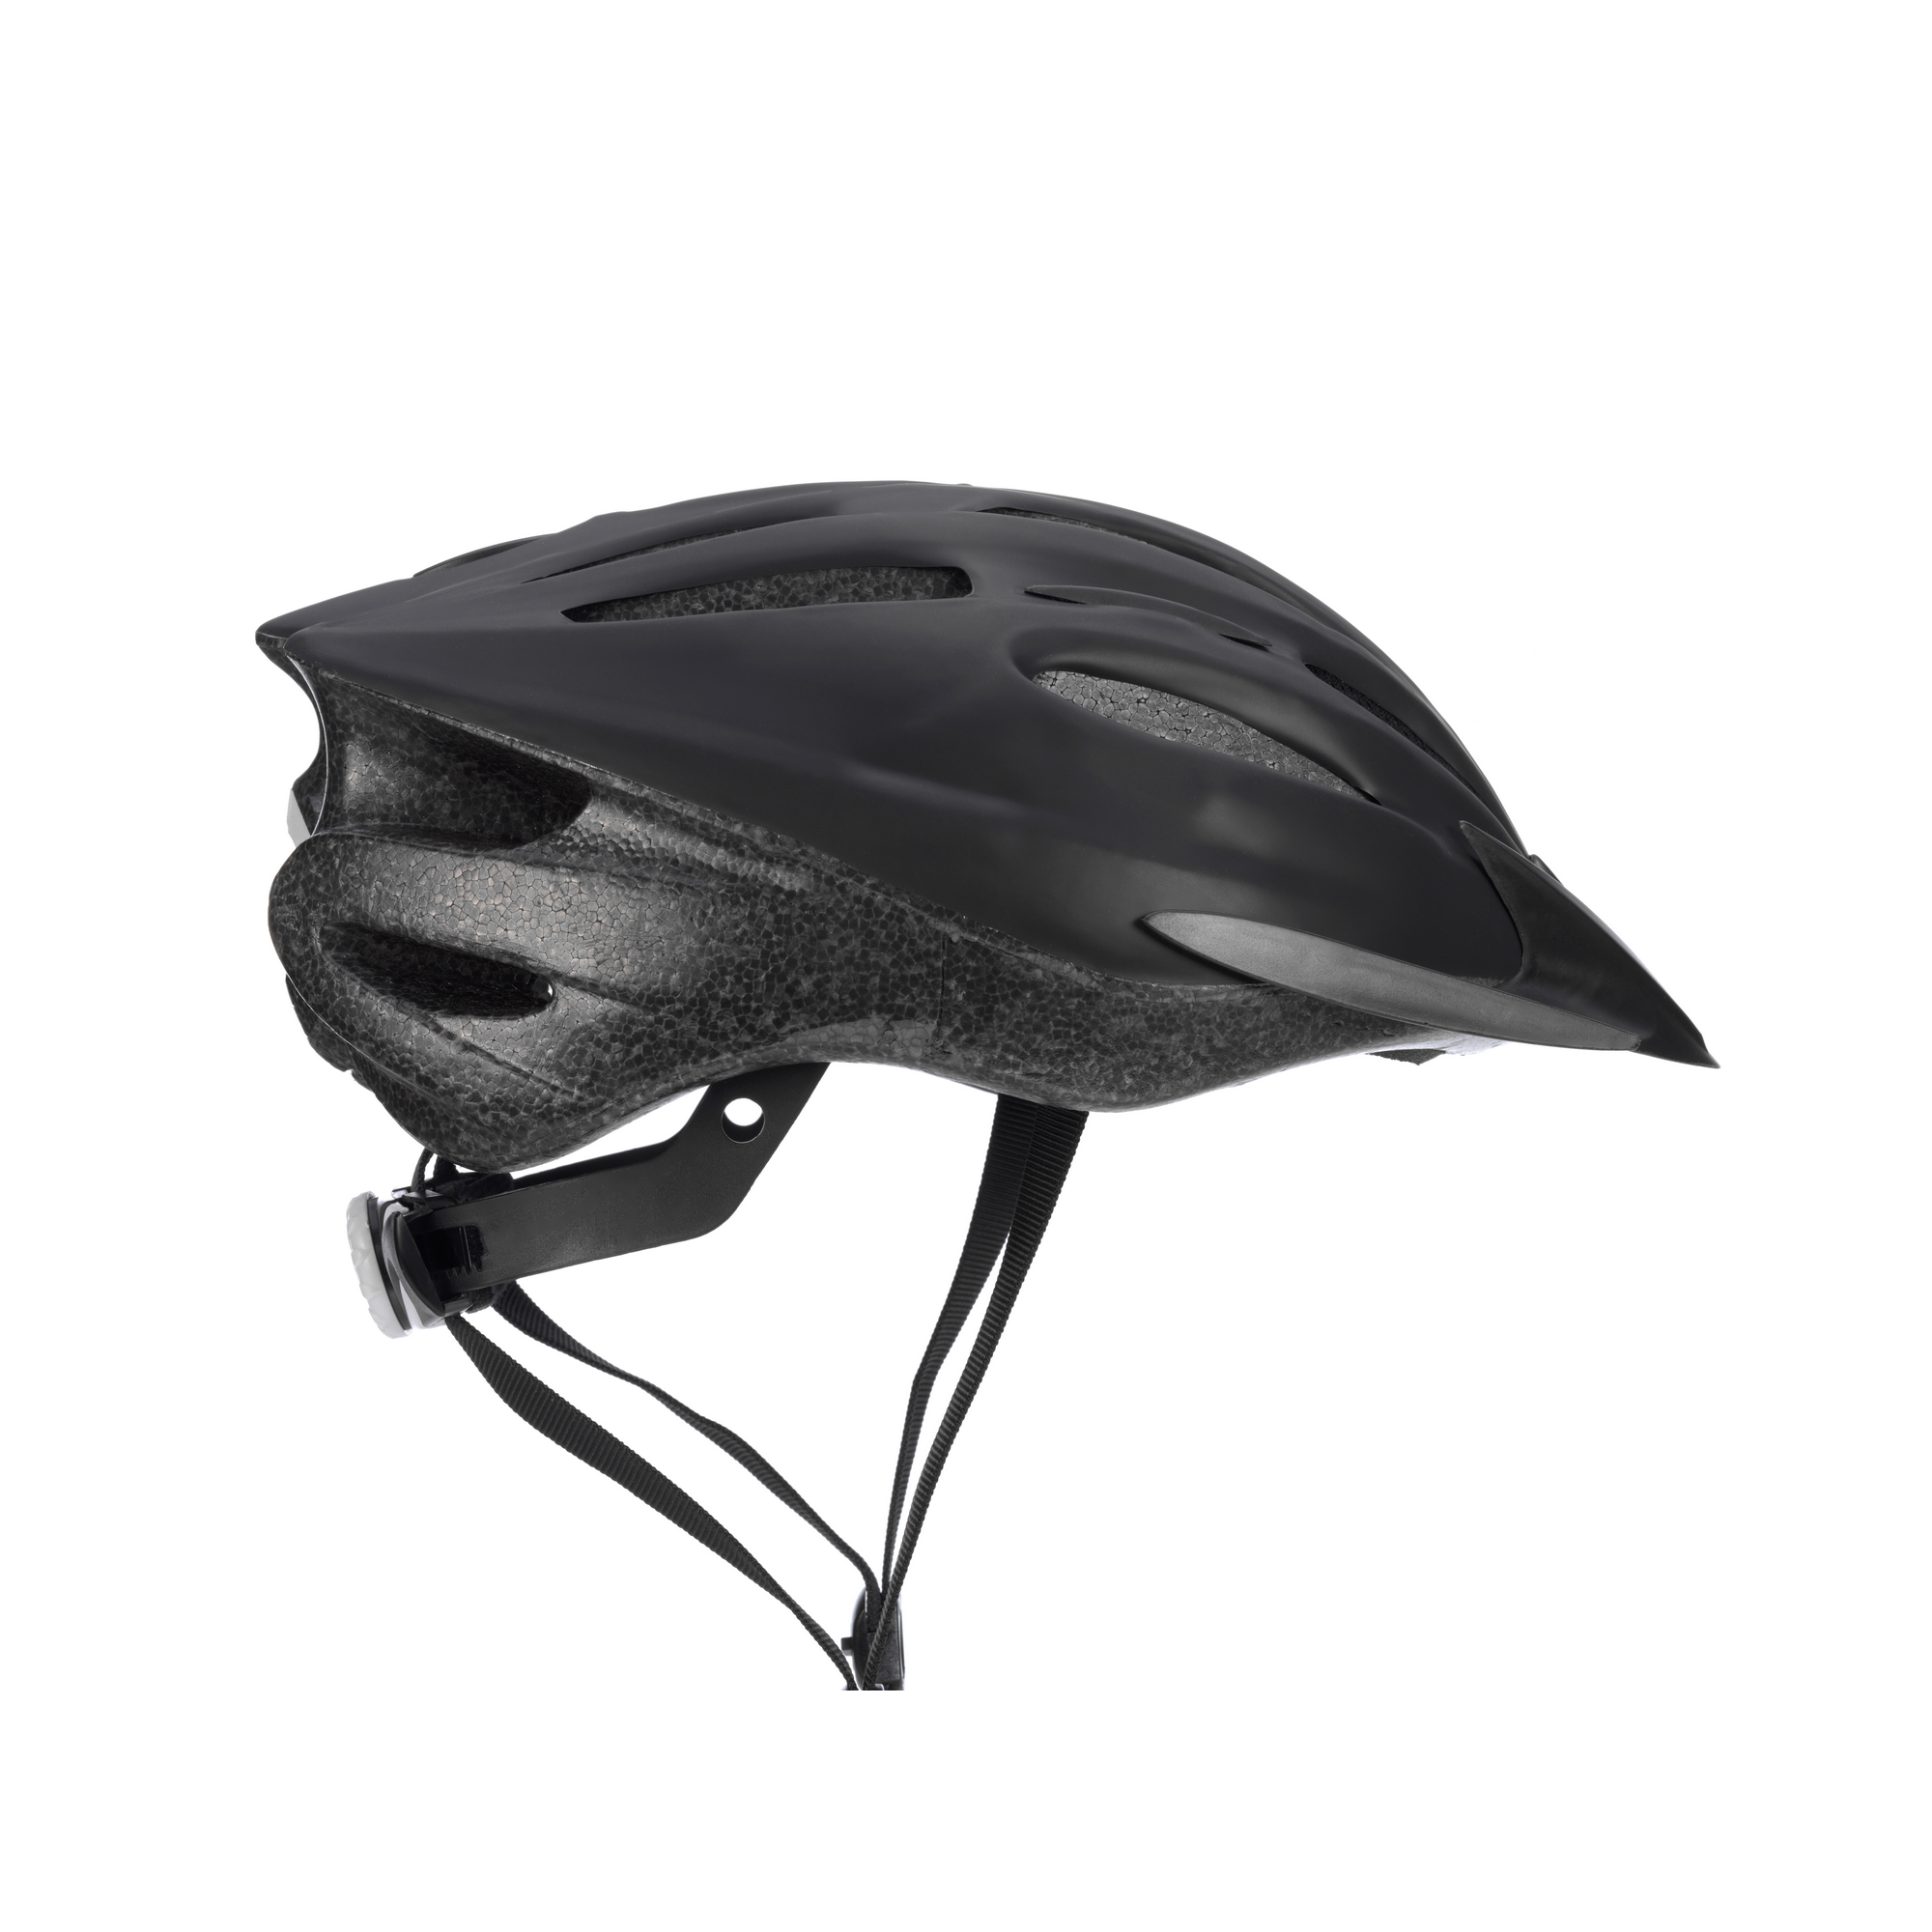 Fahrradhelm weiß 55-58 cm + product picture